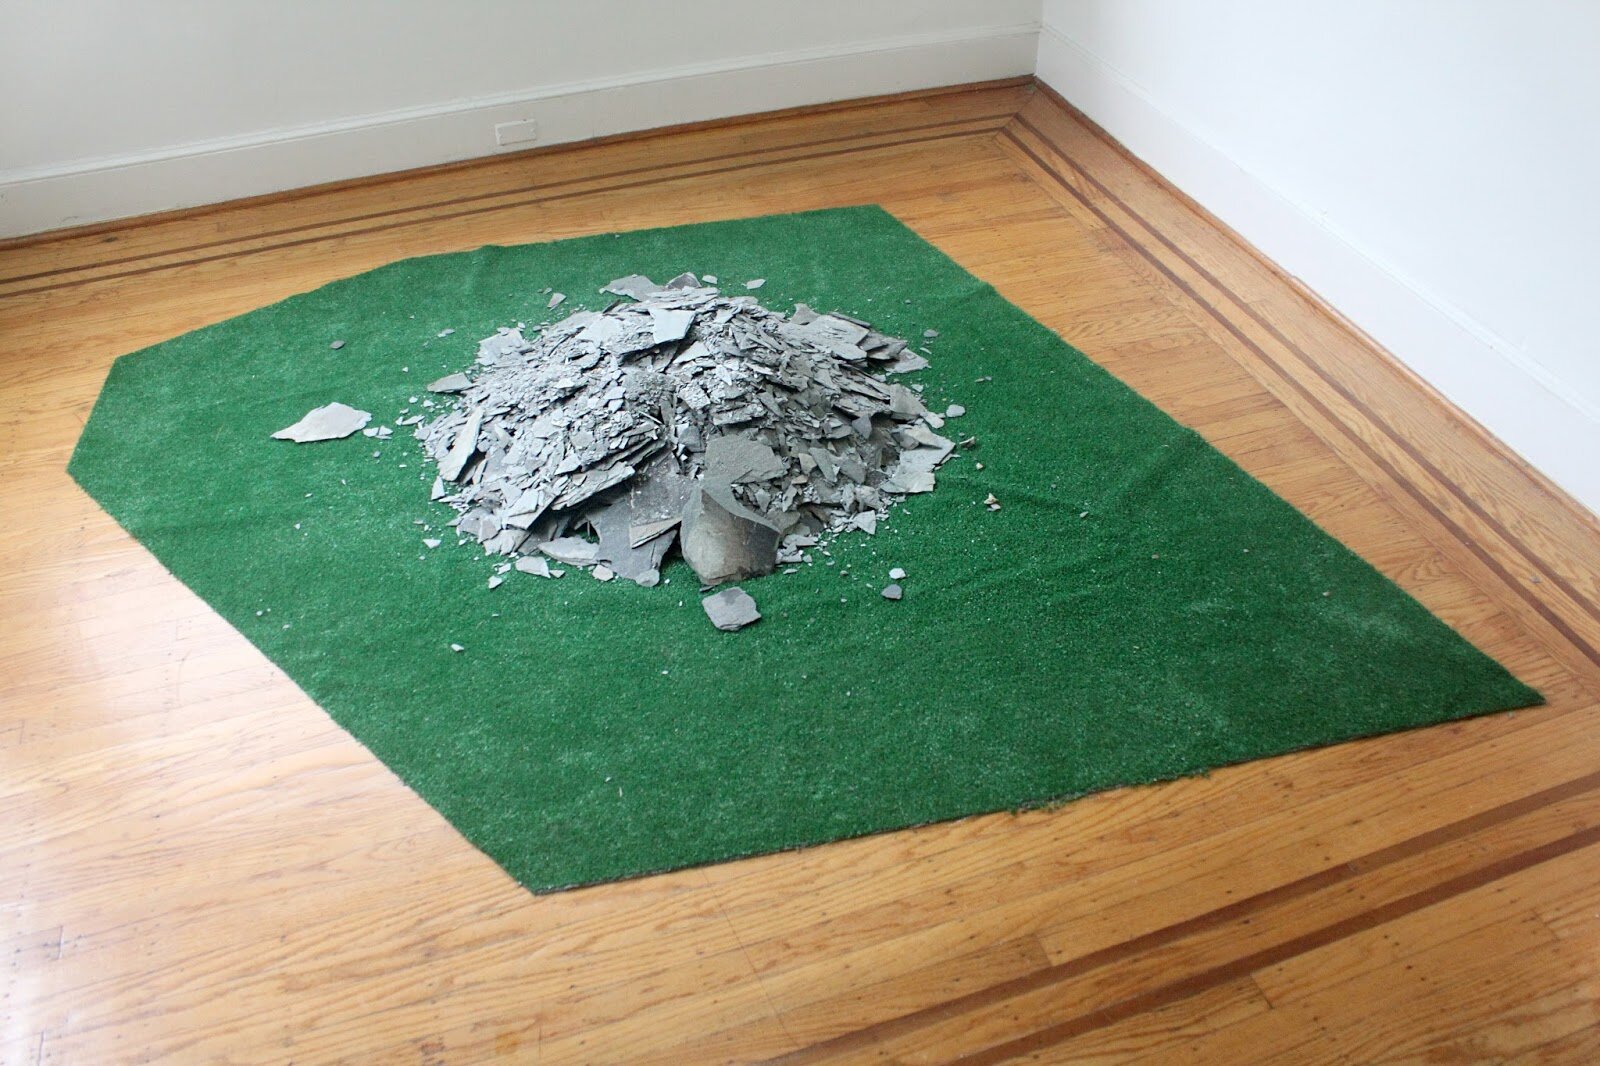   Untitled (Home)  (AstroTurf, wire, quartz, slate) 2015 